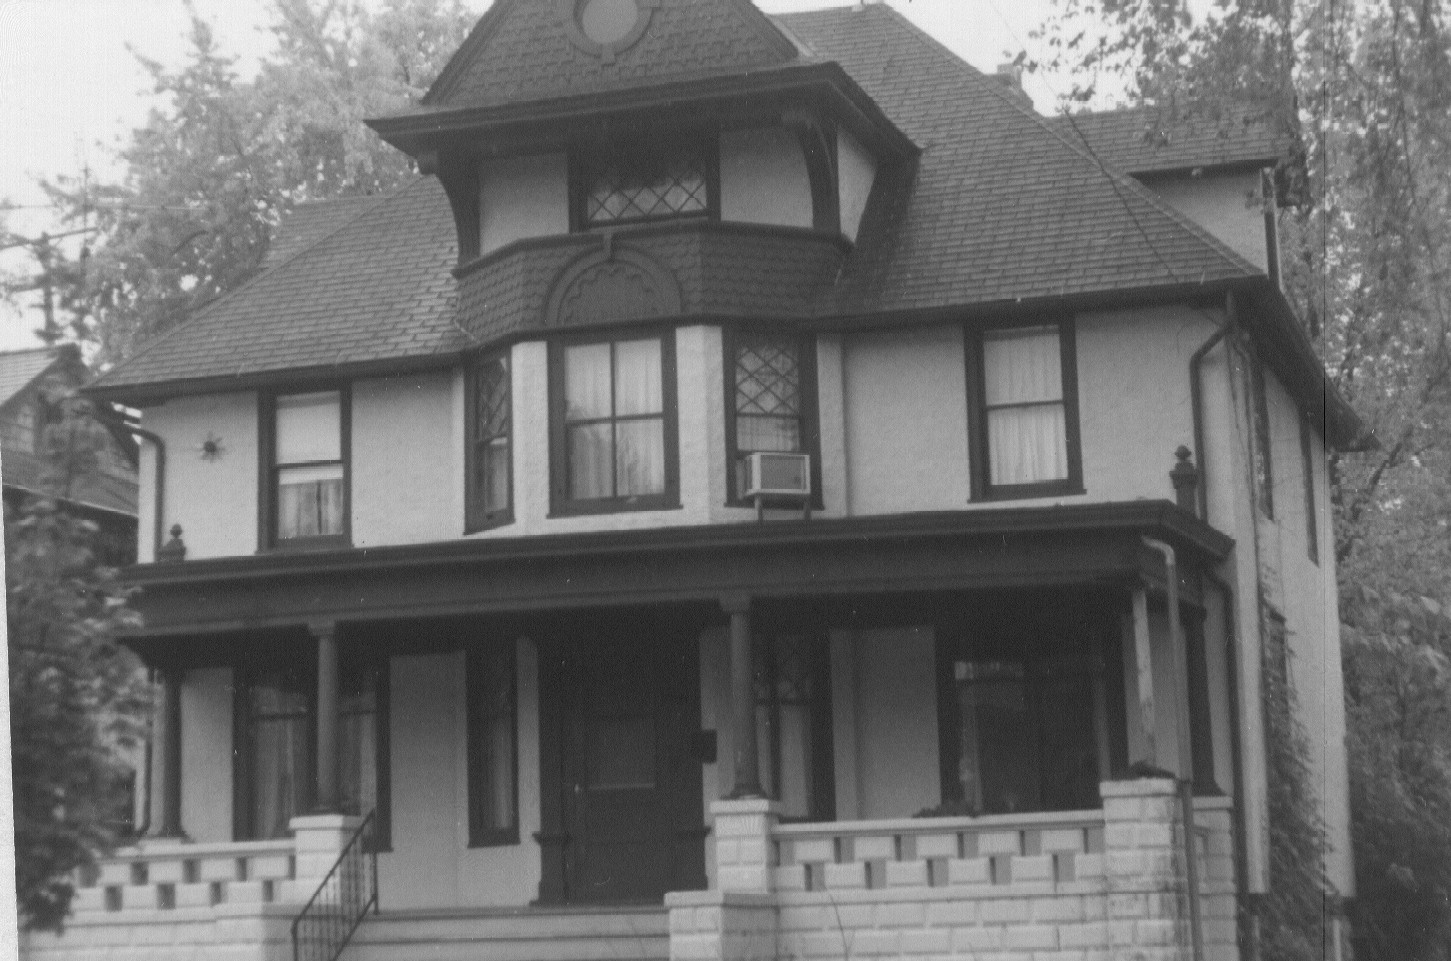 This is the house where Mary Jeanette Wagner (Hoffman) was born (was: 1019 McCall St.).  In 1957 the address was changed to 419.  It is also the house where her father died of a kidney disorder.